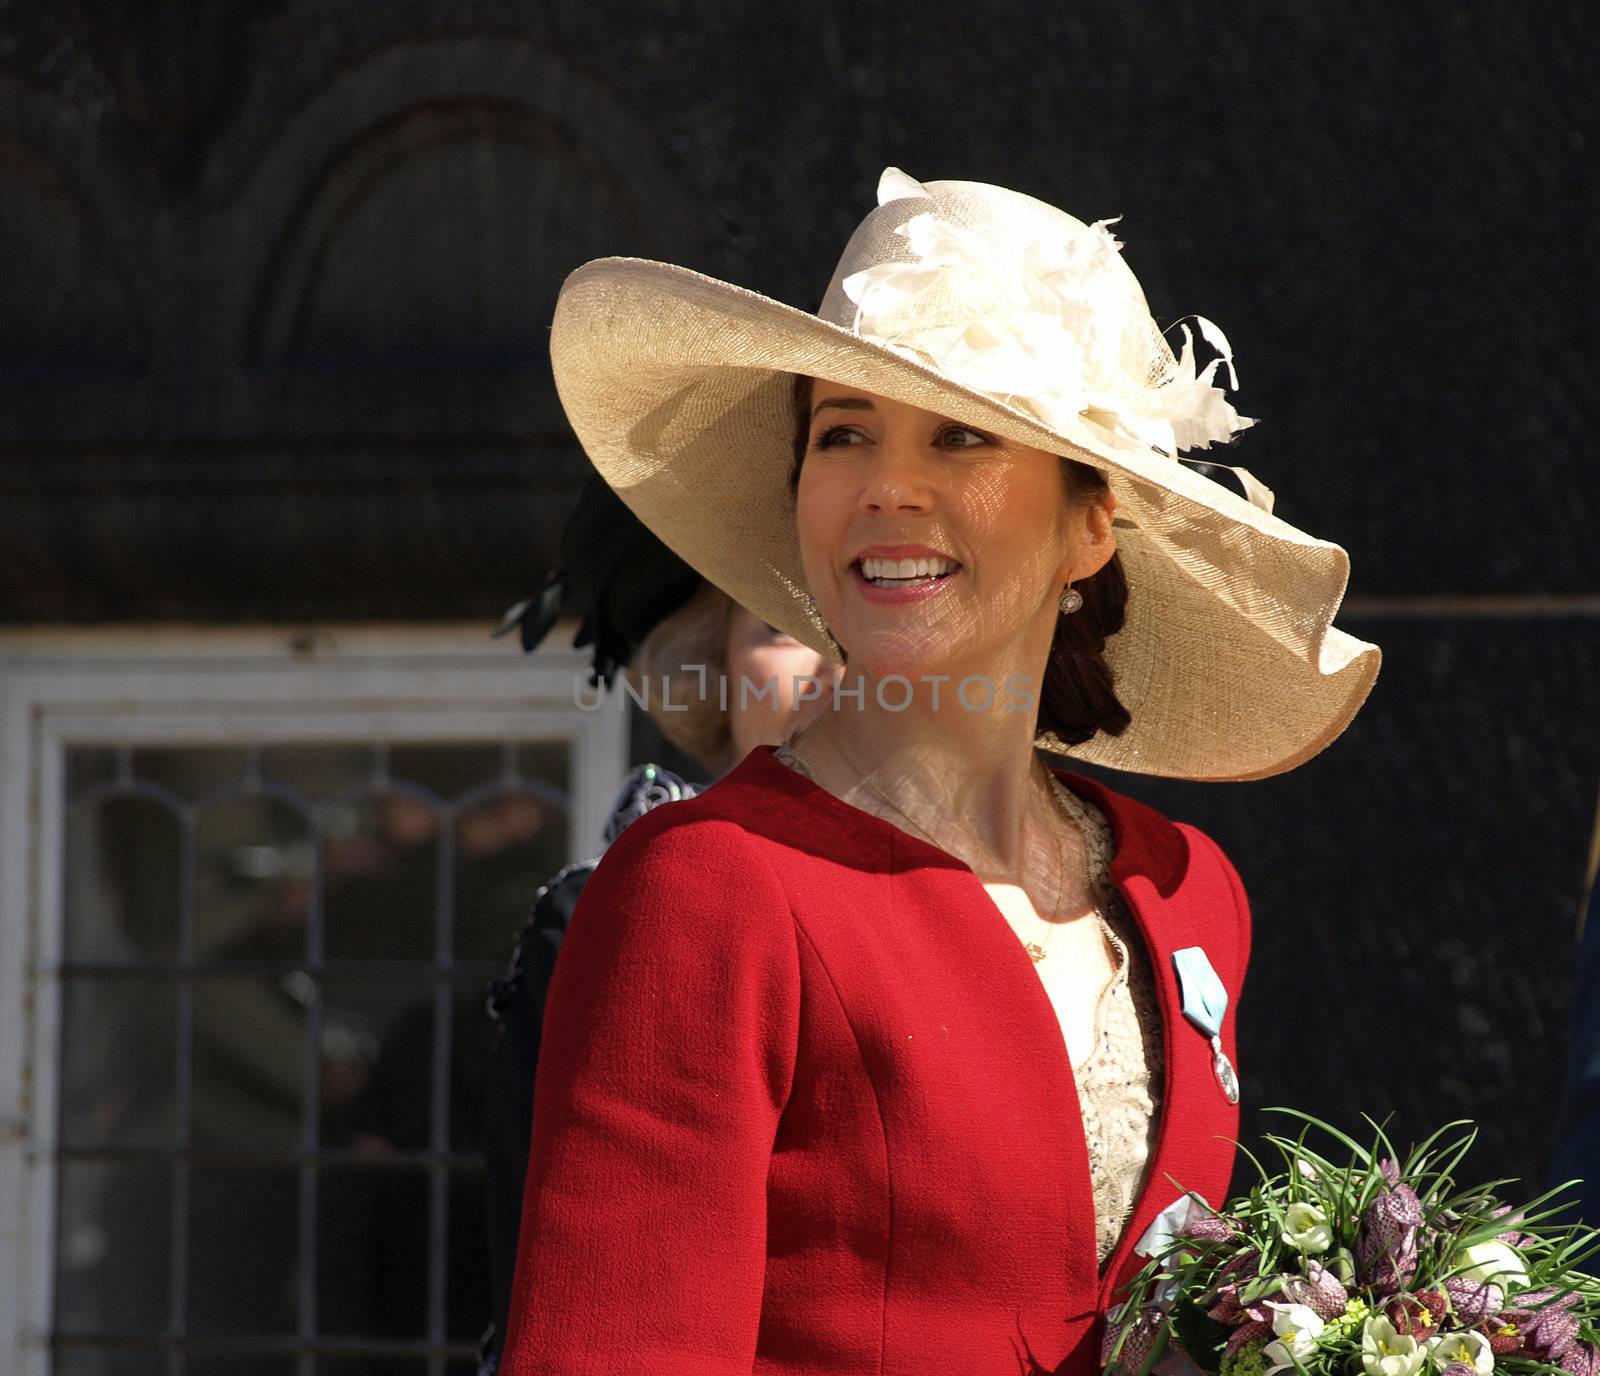 Mary Elizabeth, Her Royal Highness Crown Princess, Crown Princess of Denmark by Ric510